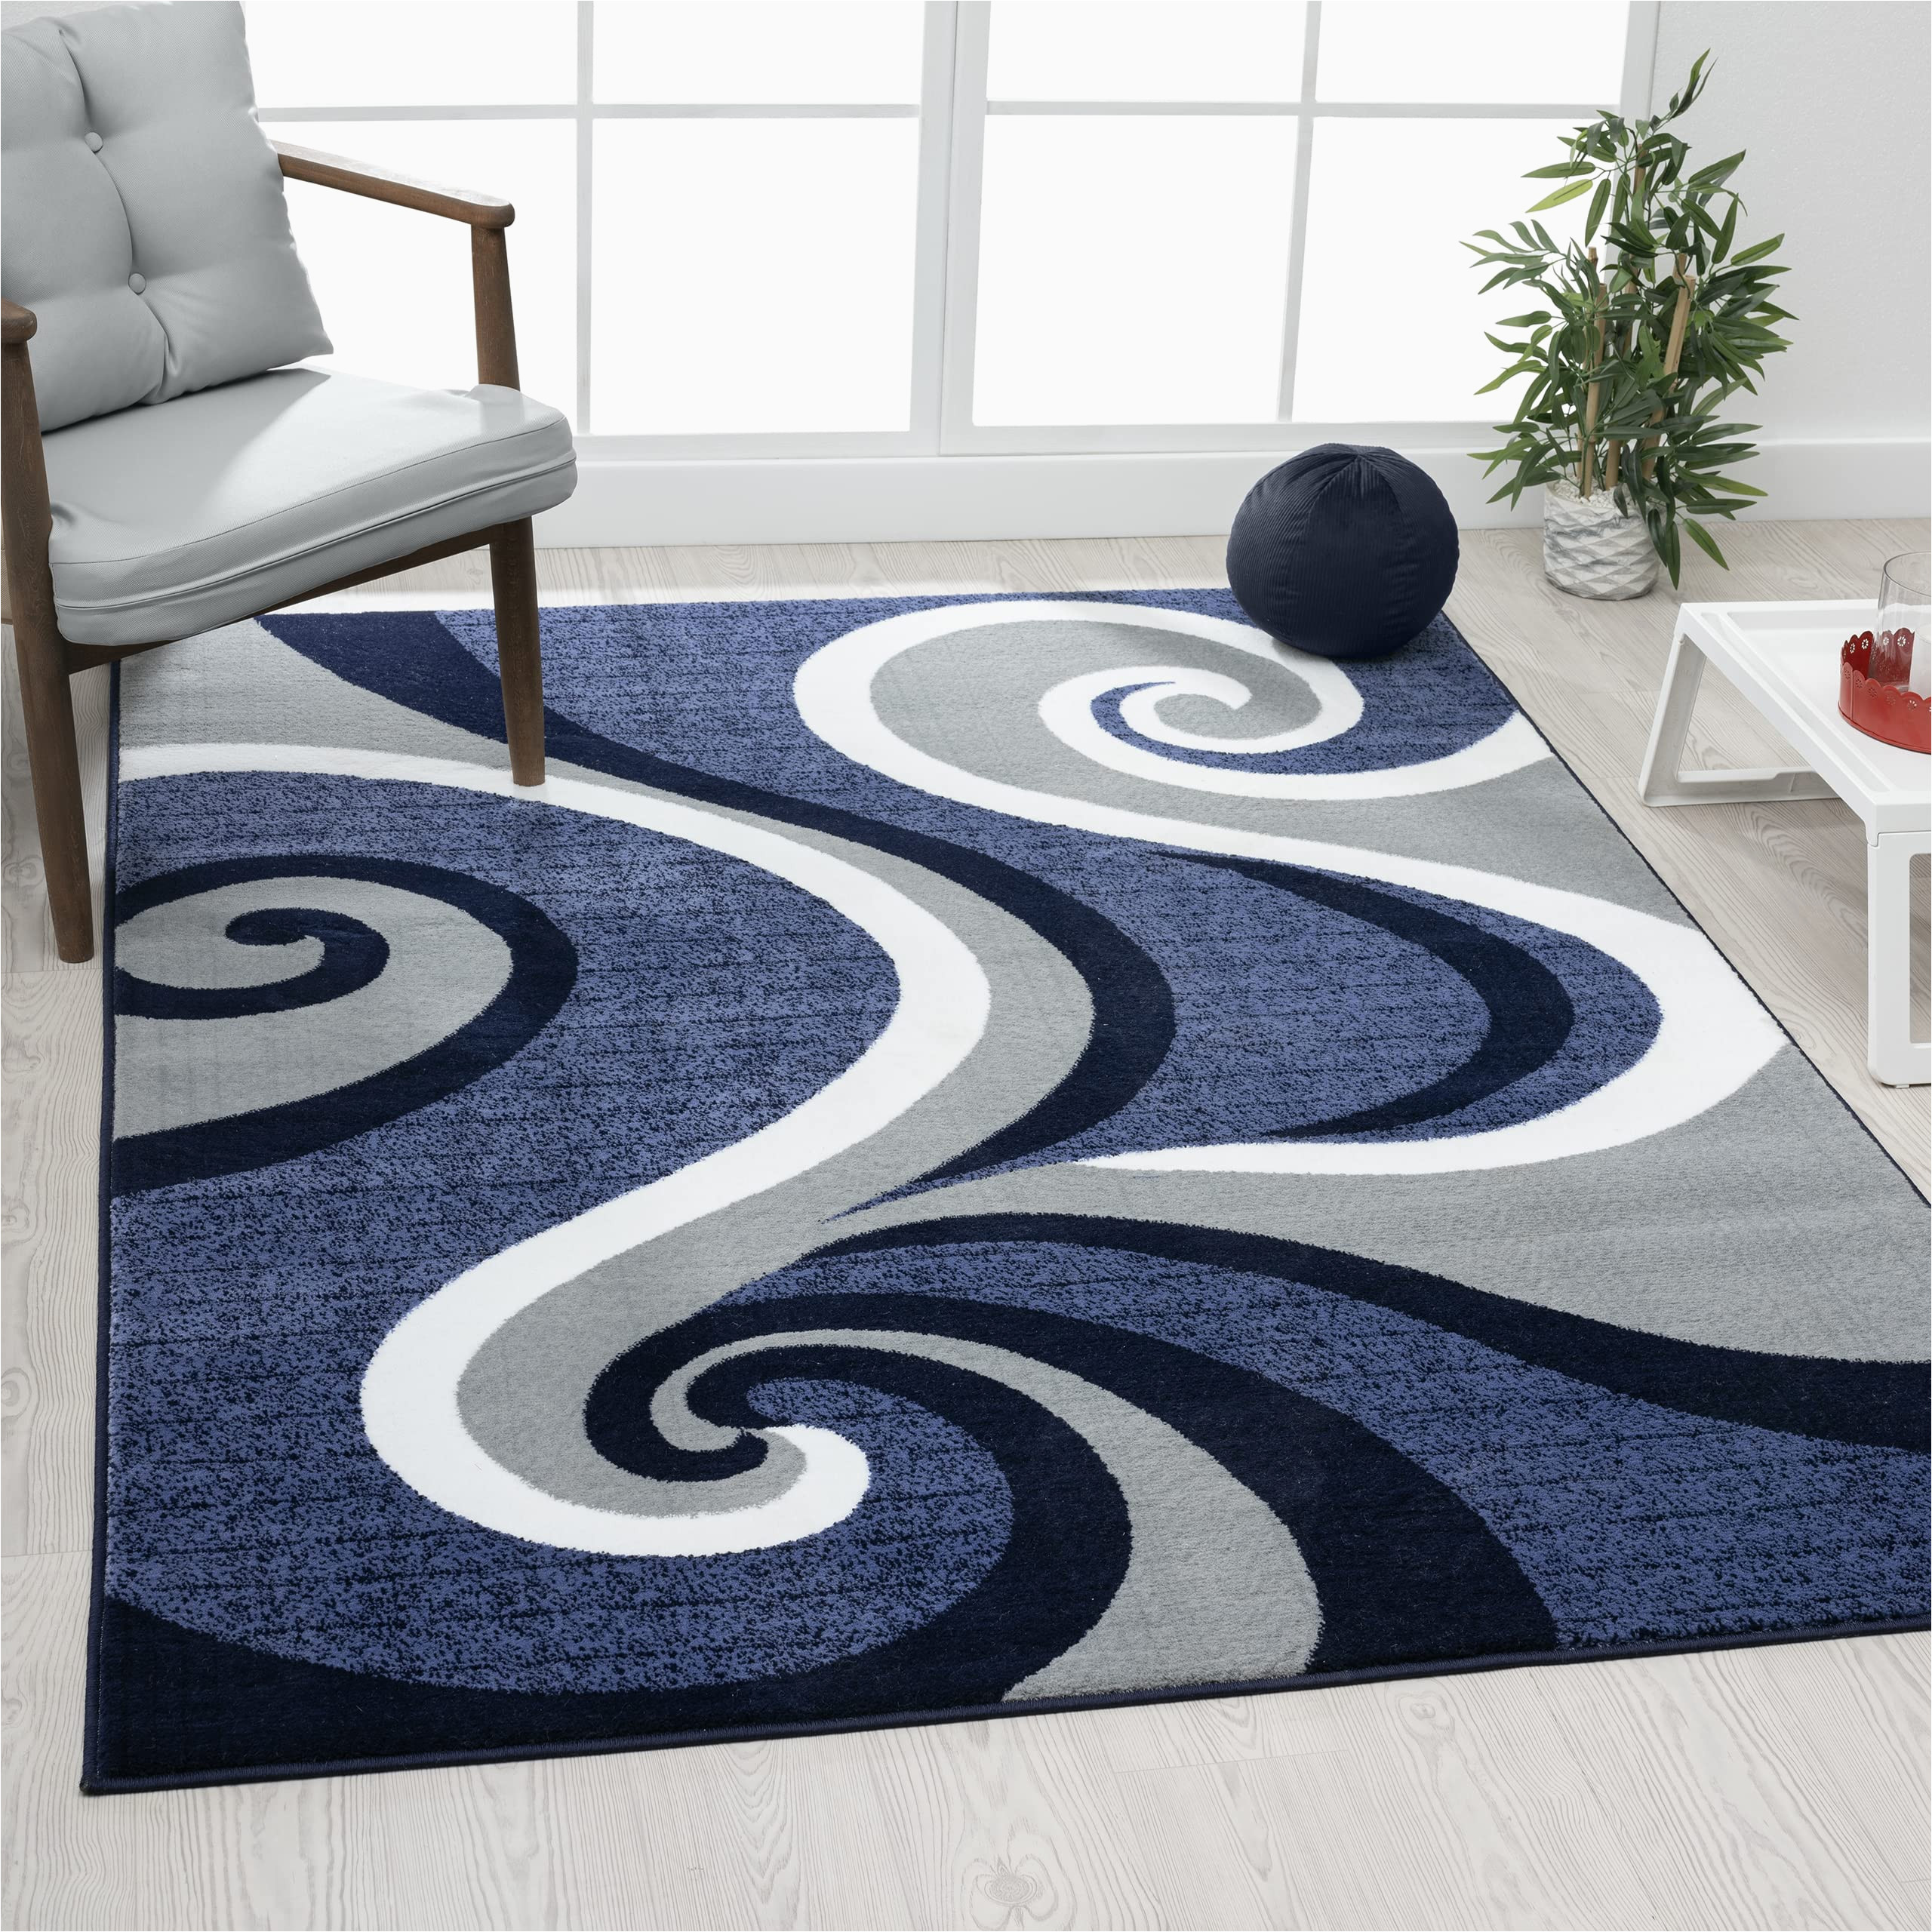 Blue Grey and White Rug 0327 Blue White Gray 5 X 7 area Rug Abstract Carpet by Persian-rugs